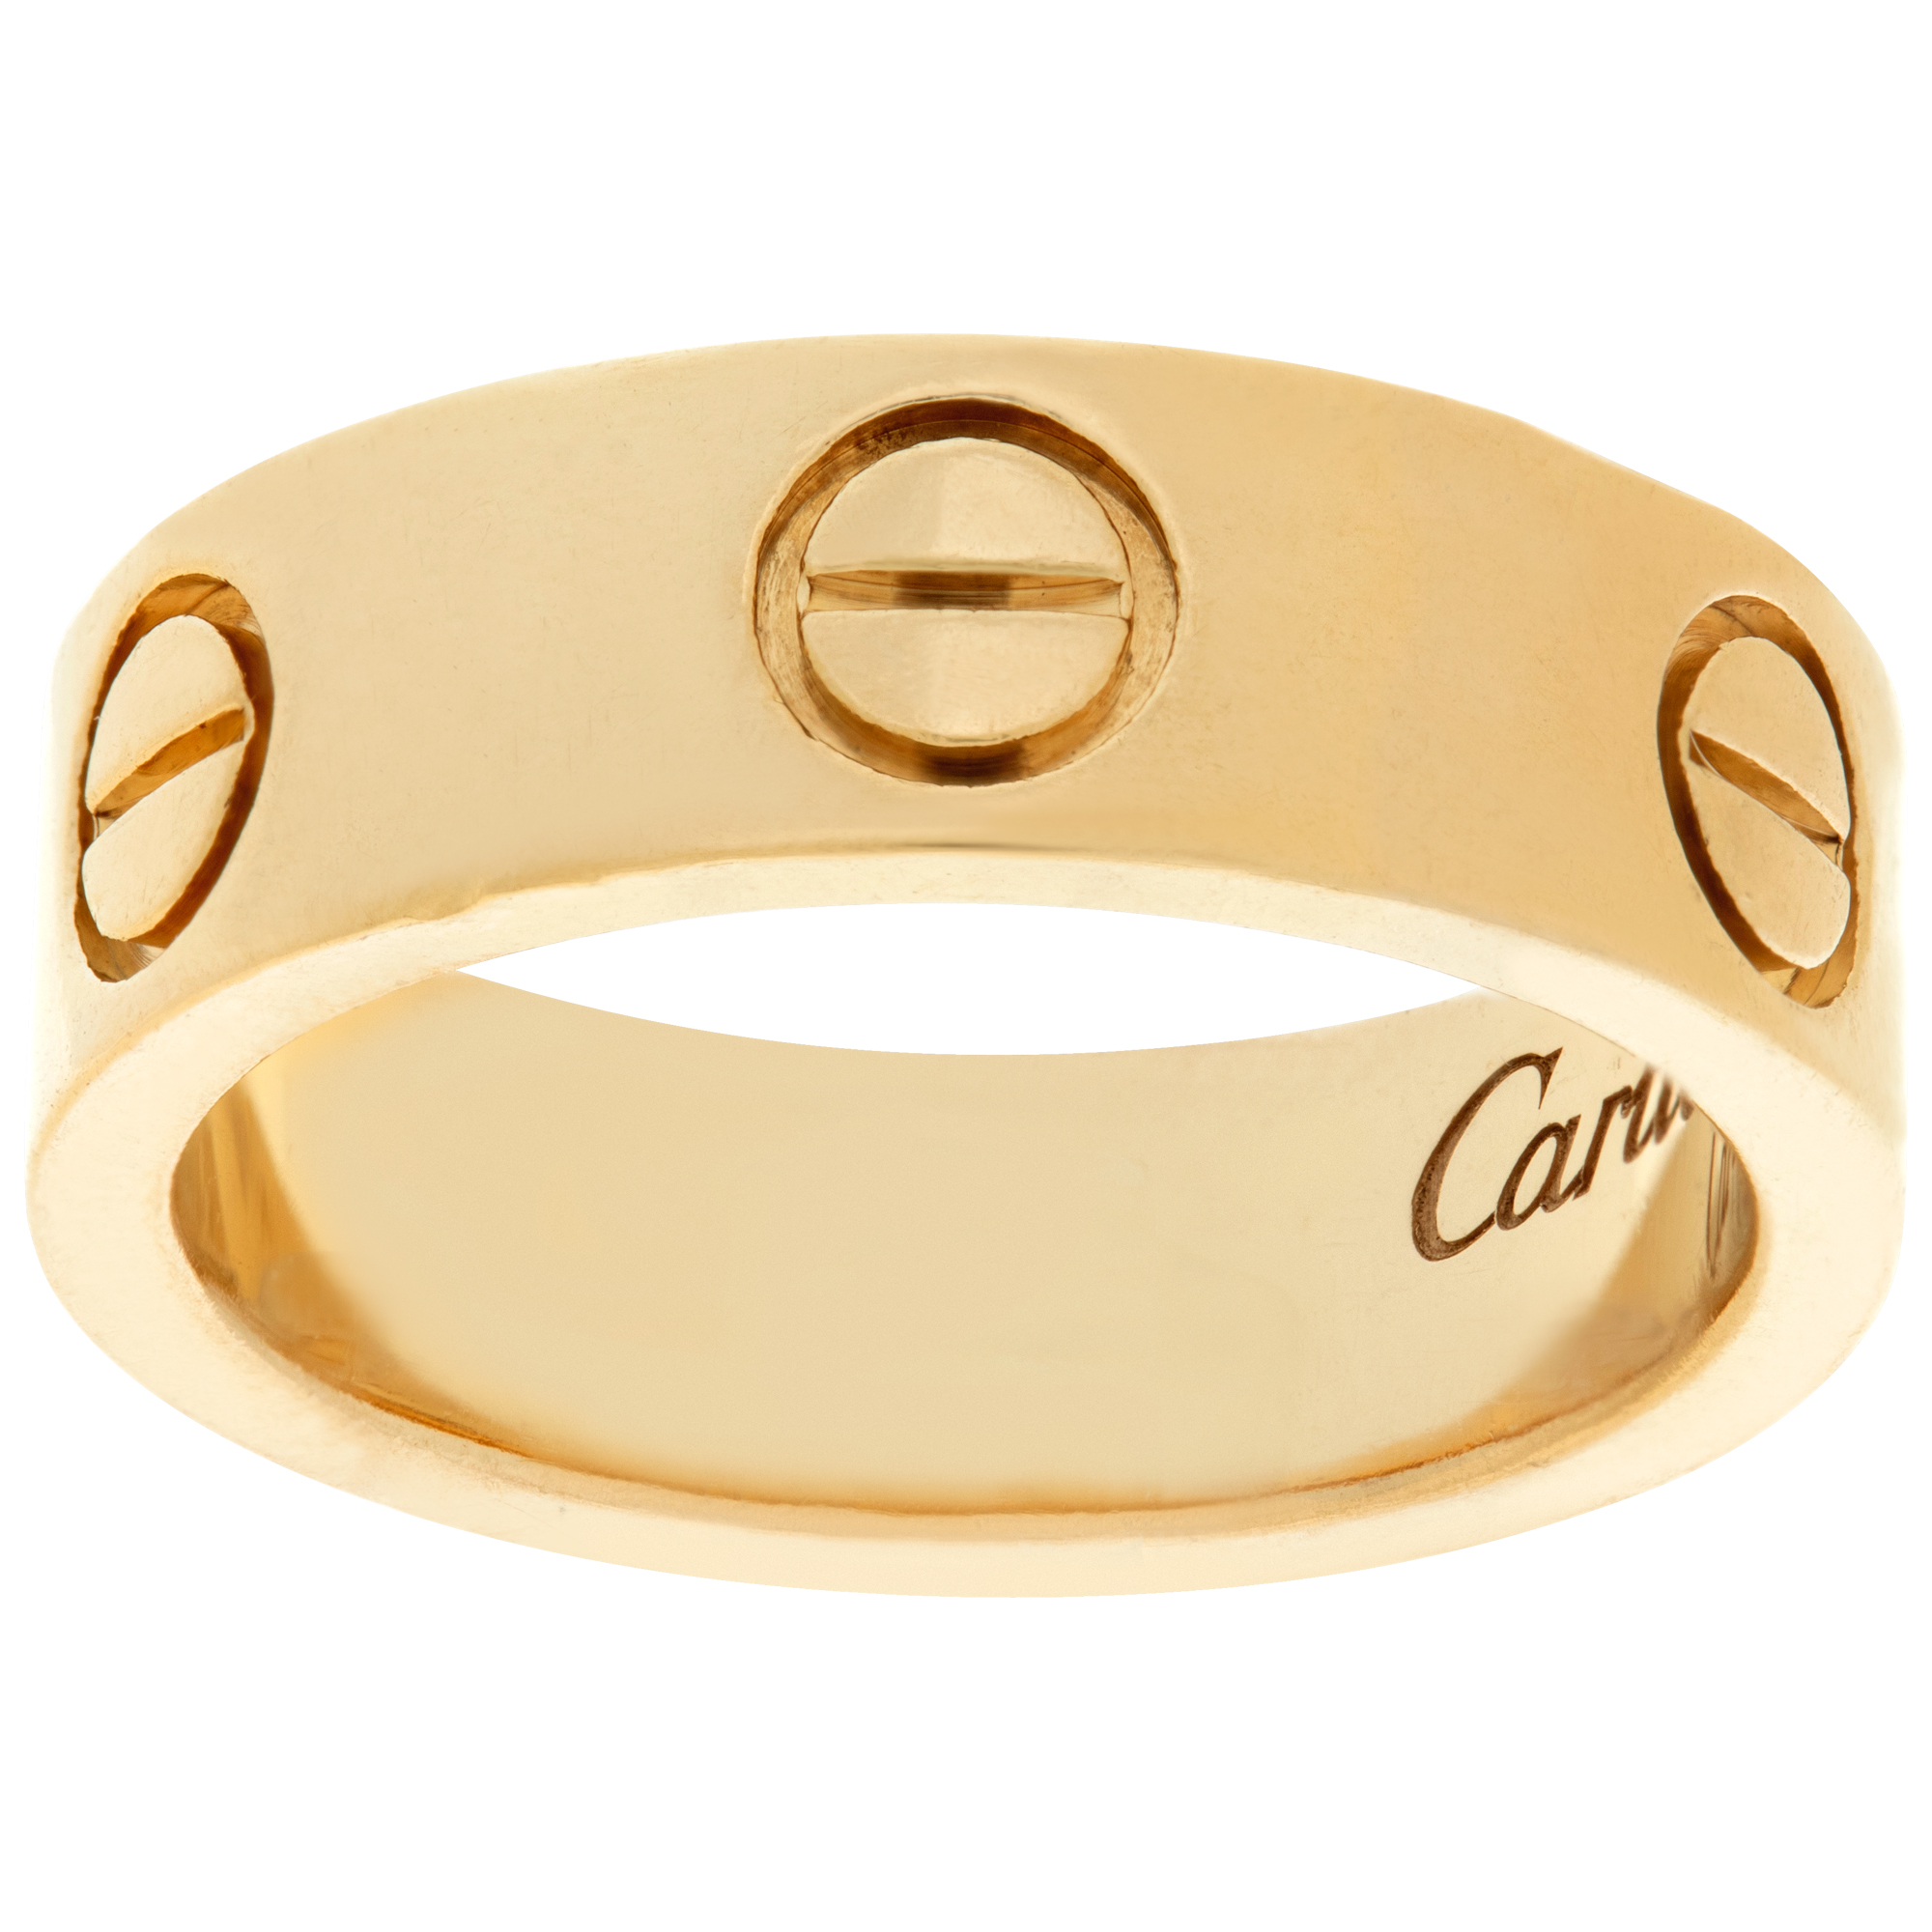 Cartier Love ring in 18k yellow gold, size 6, width 6mm. | G